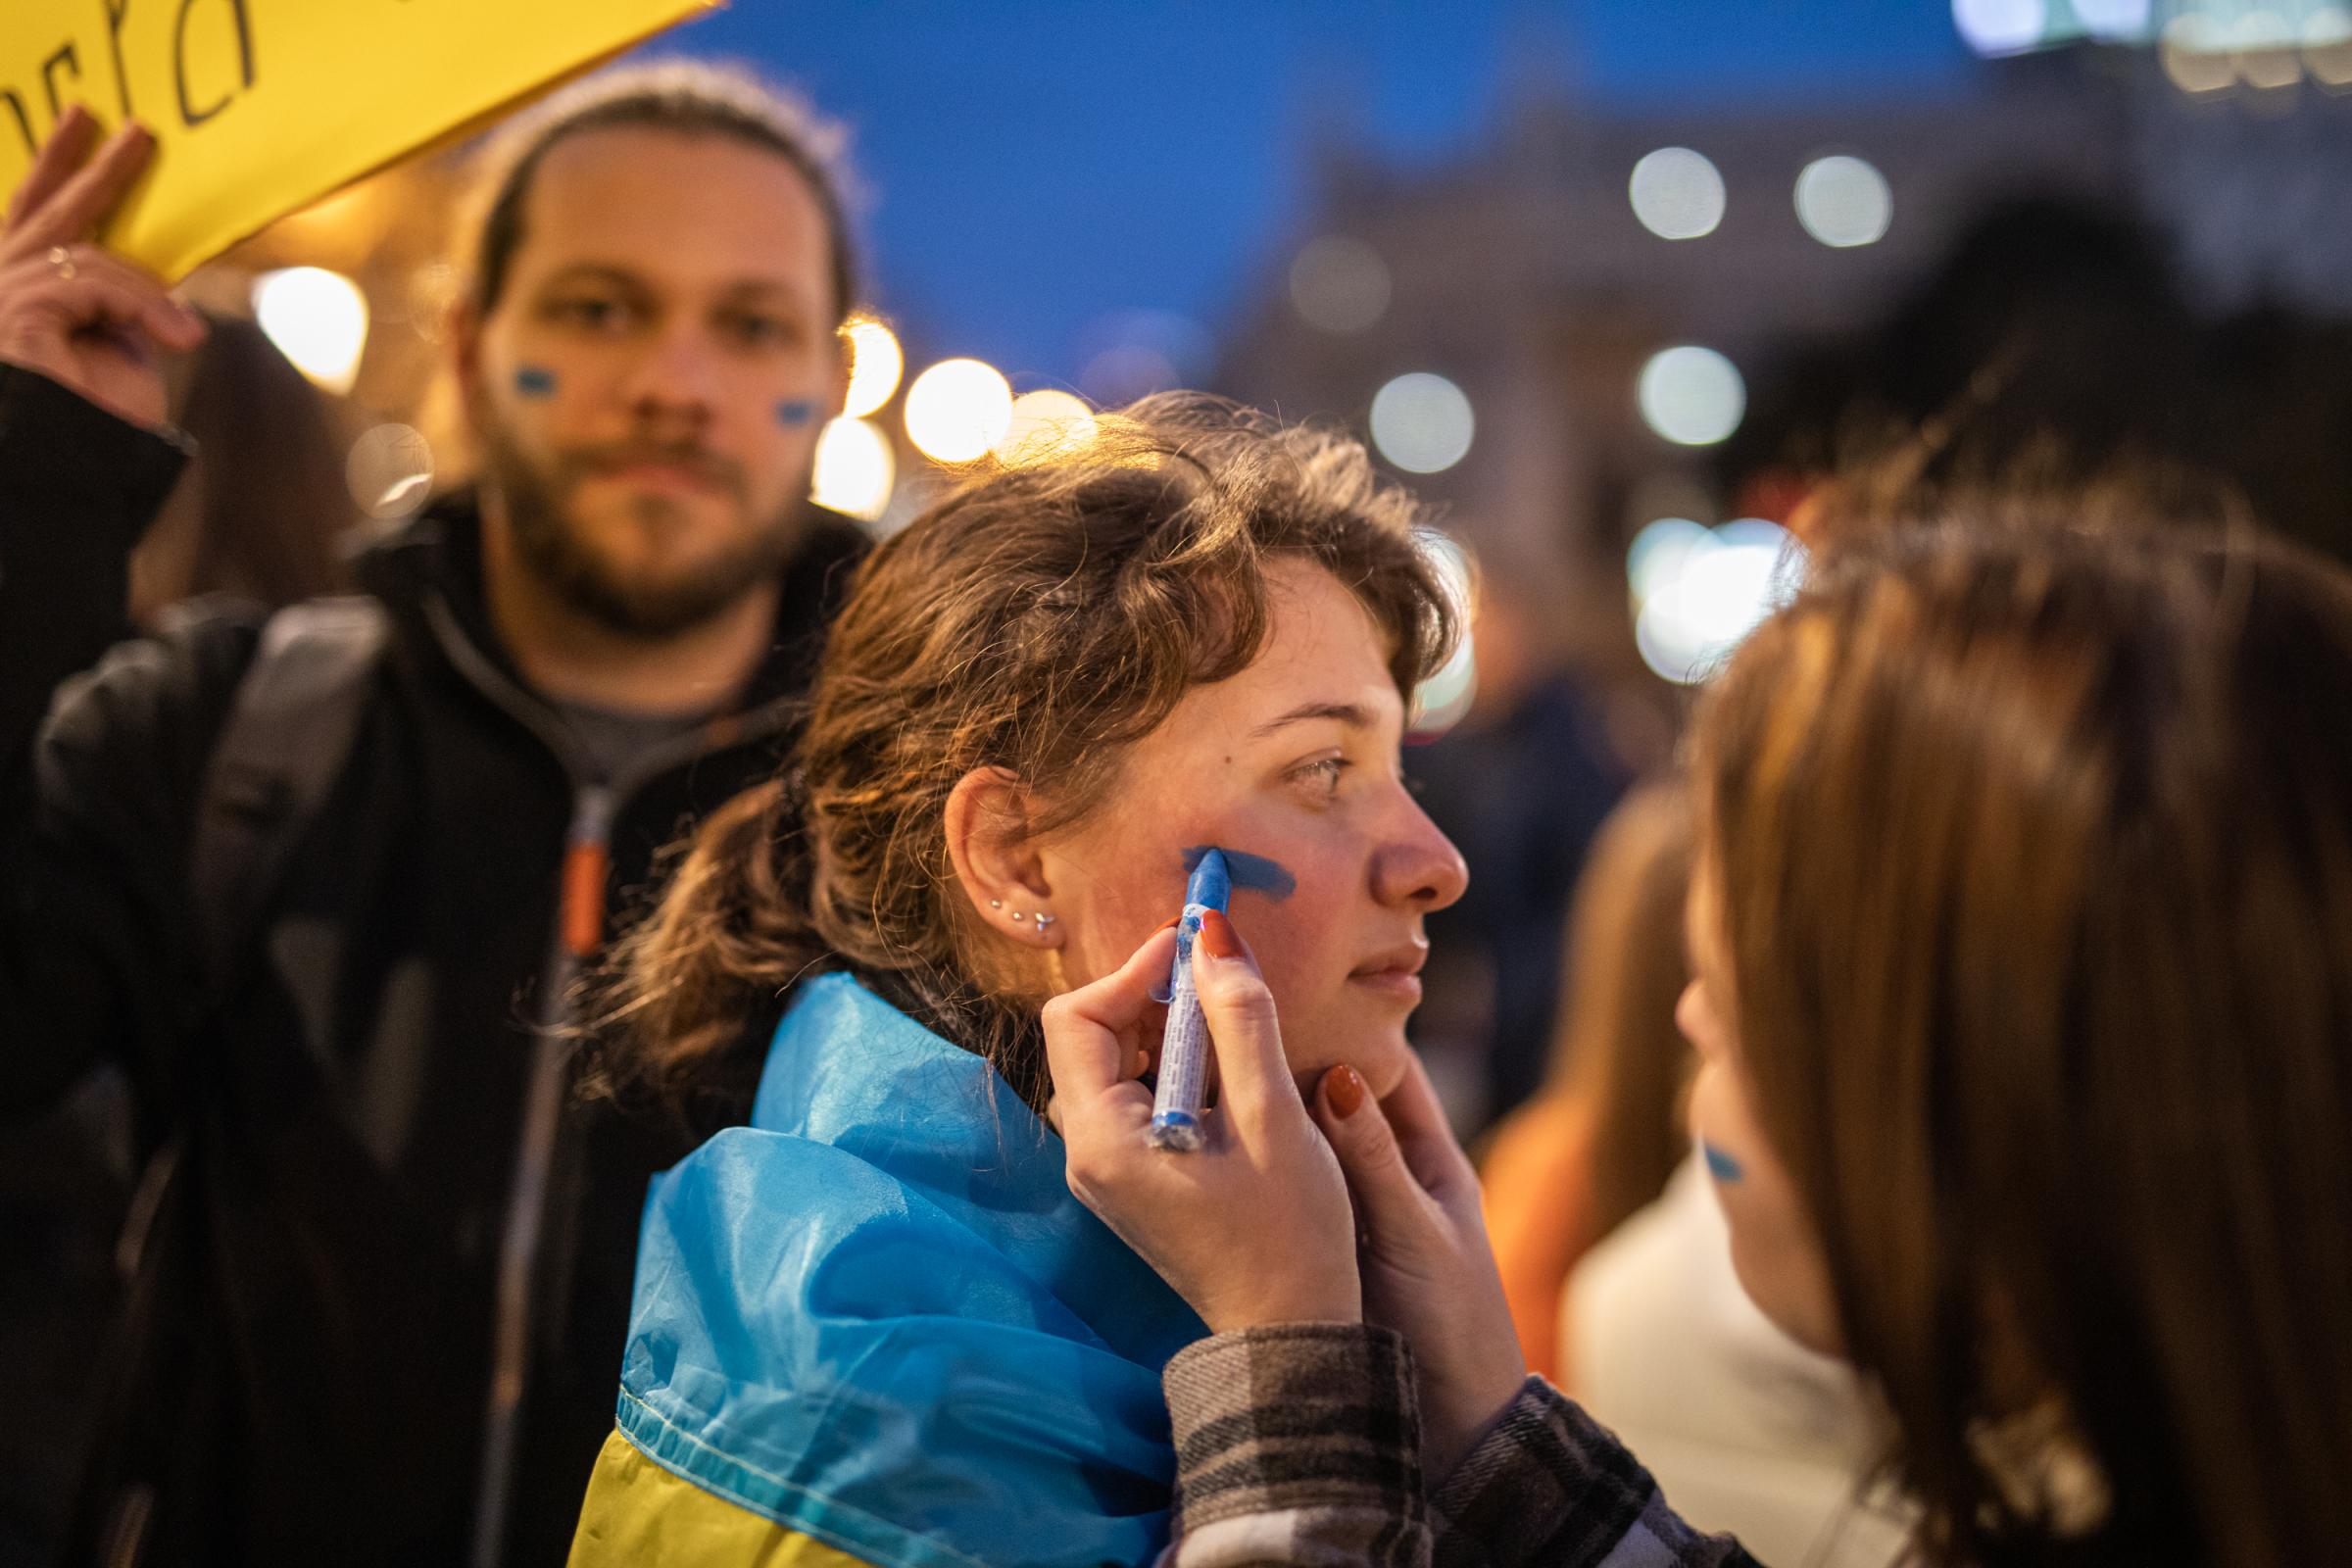 Protestors In Spain Rally For Ukraine After Russian Invasion - BARCELONA, SPAIN - FEBRUARY 26: A girl paints her...